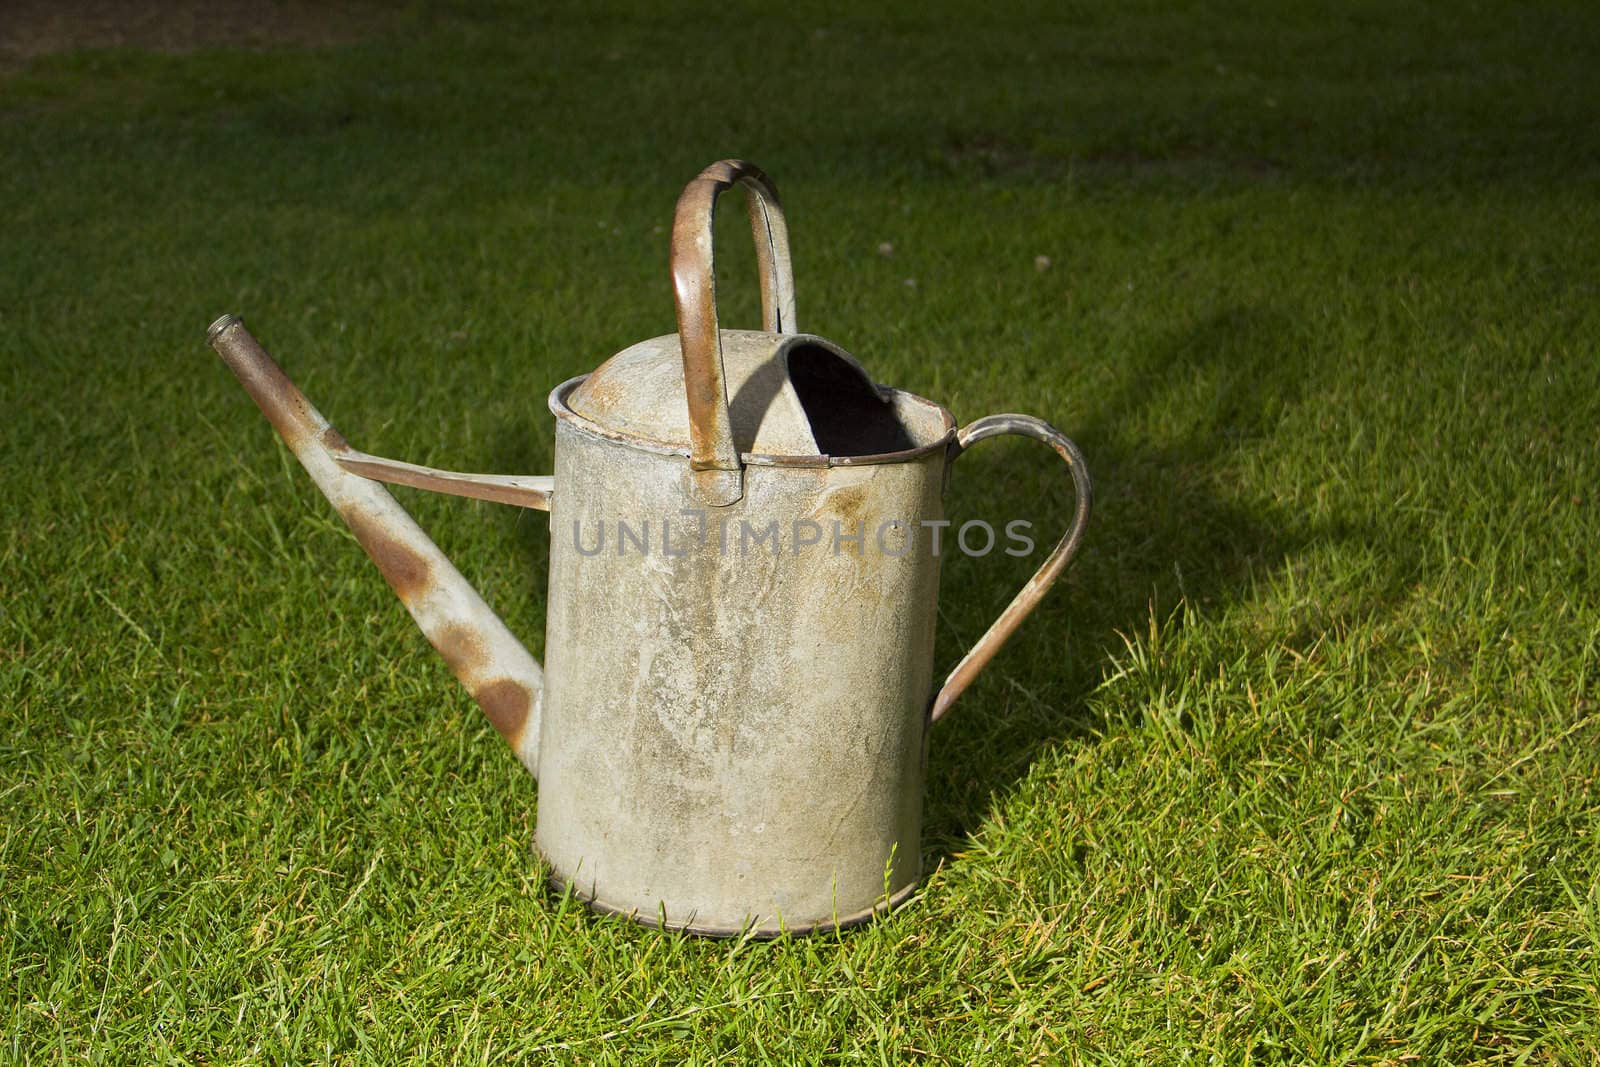 Sinister Looking Watering Can by Downart